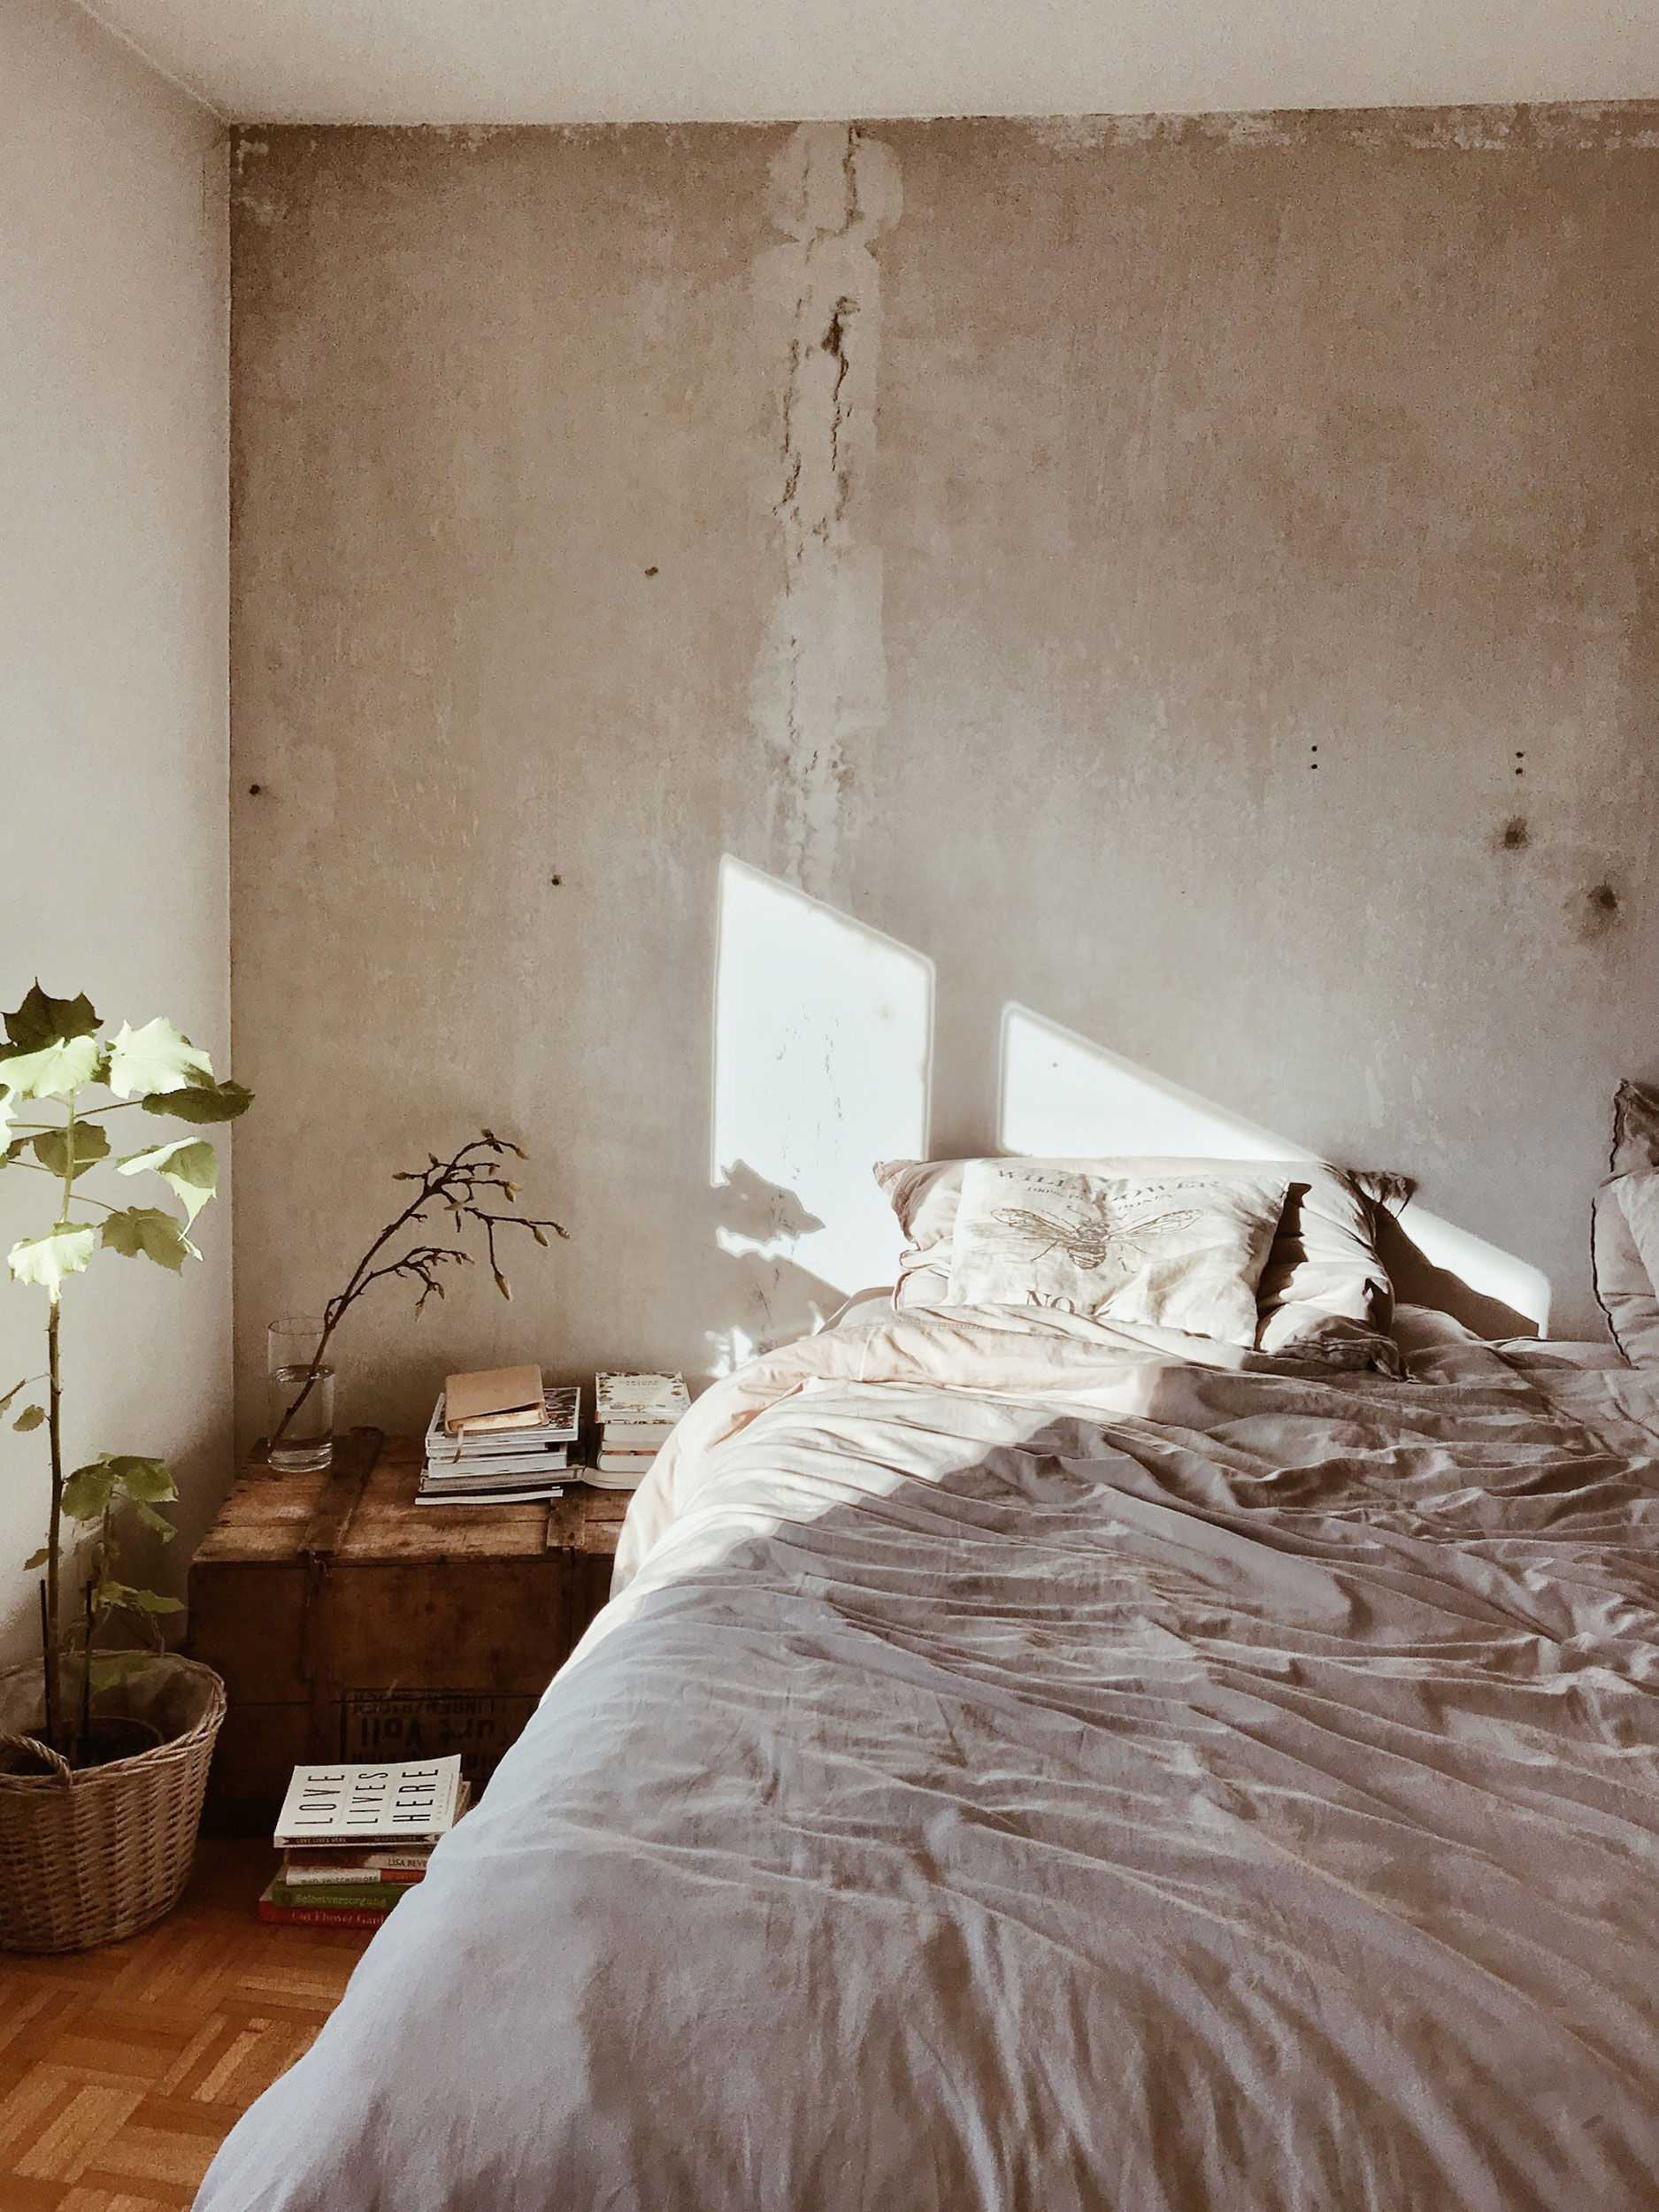 Minimal rustic bedroom with linen bed, plant, books and sunlight